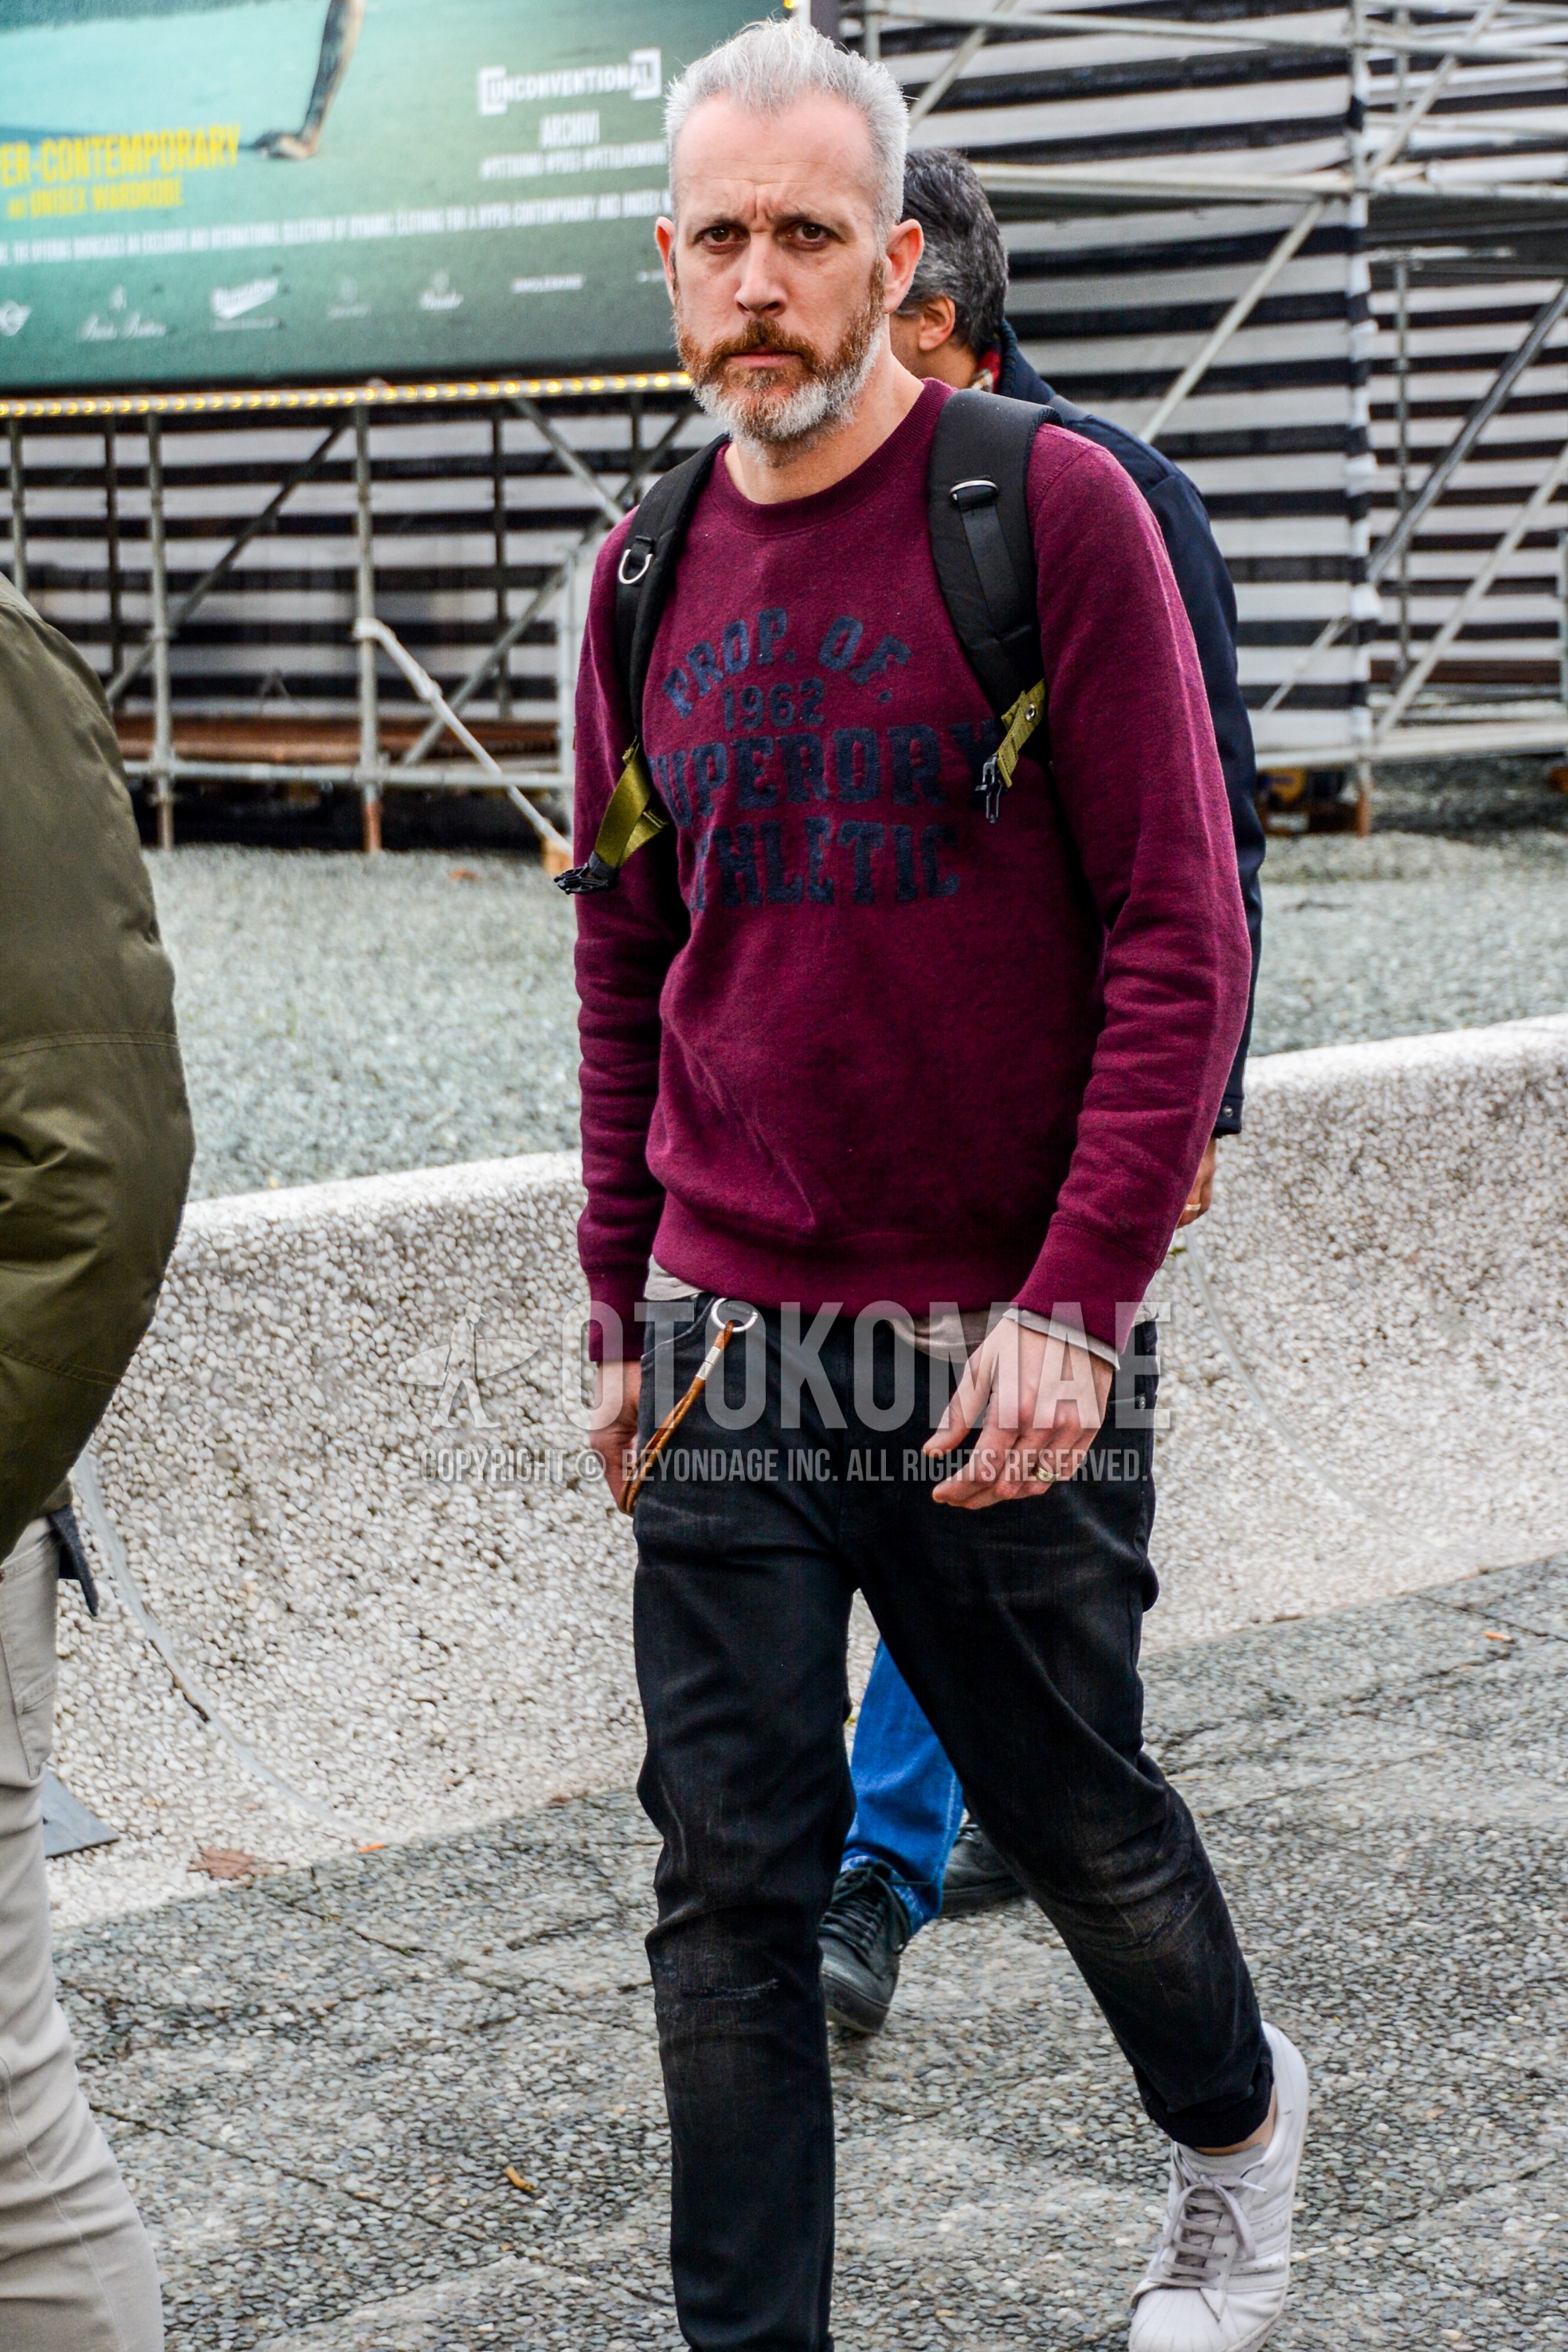 Men's spring autumn outfit with red lettered sweatshirt, black plain denim/jeans, white low-cut sneakers.